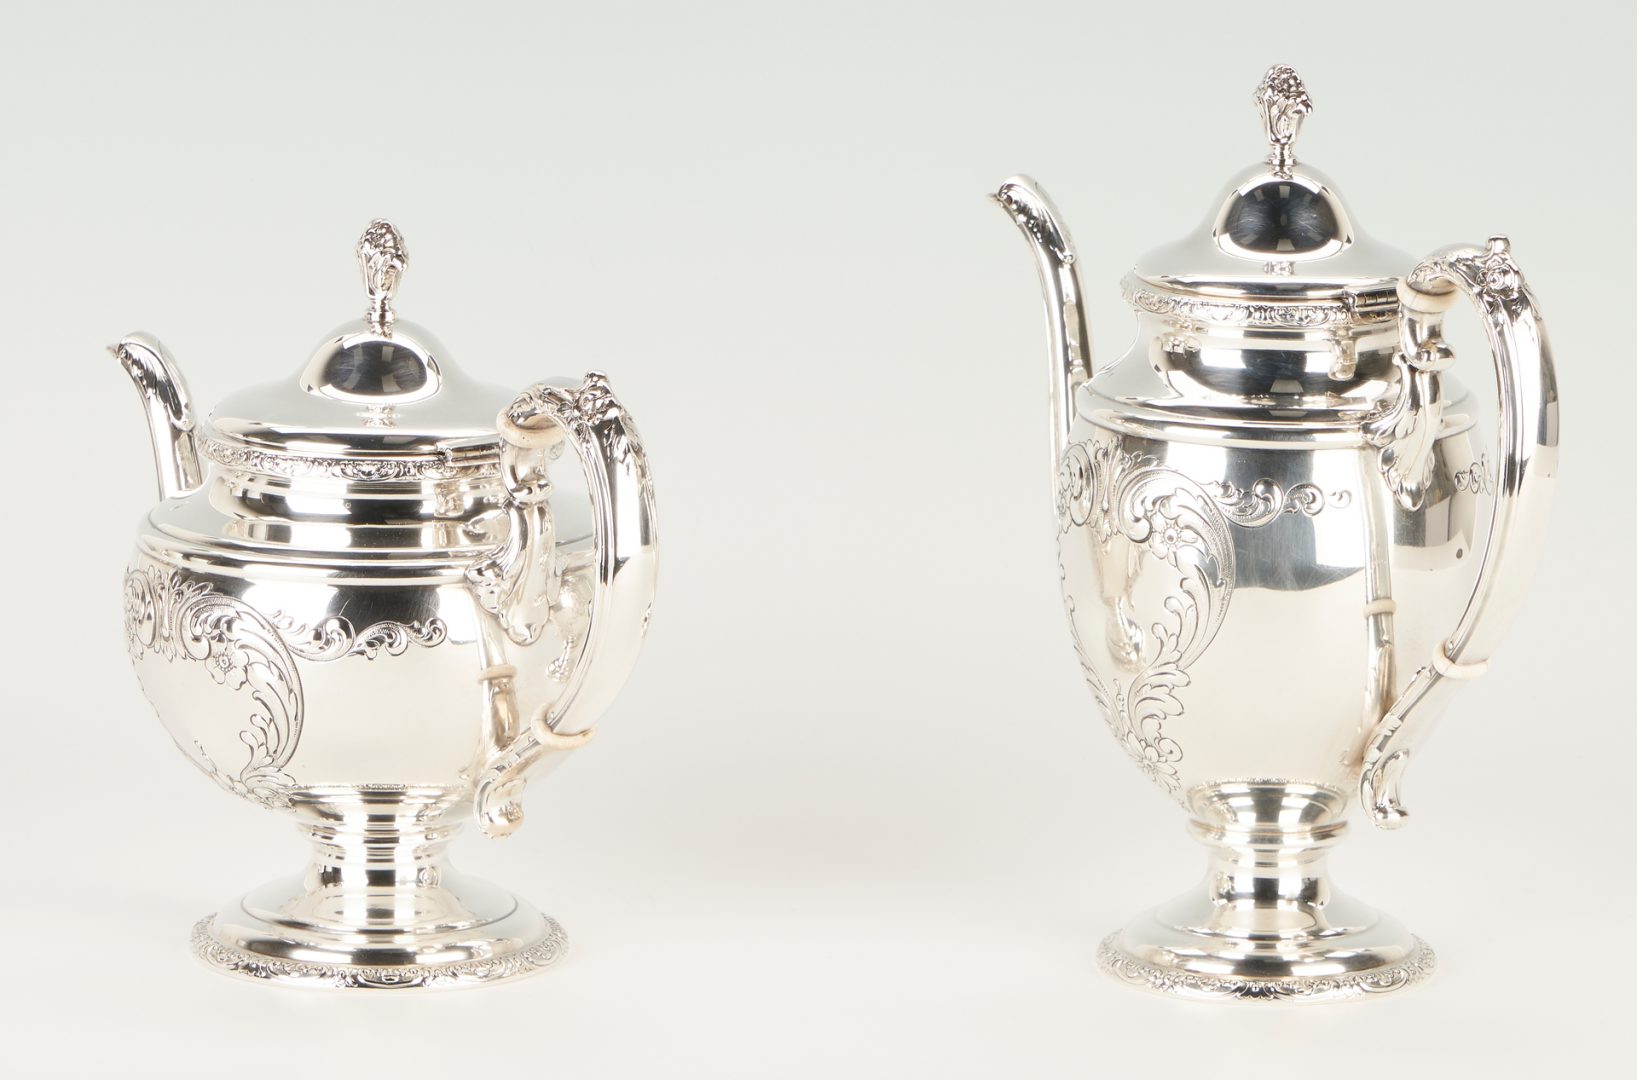 Lot 423: 5 Pcs. Towle Old Master Sterling Silver Tea Set + Gorham Chantilly S/P Tray